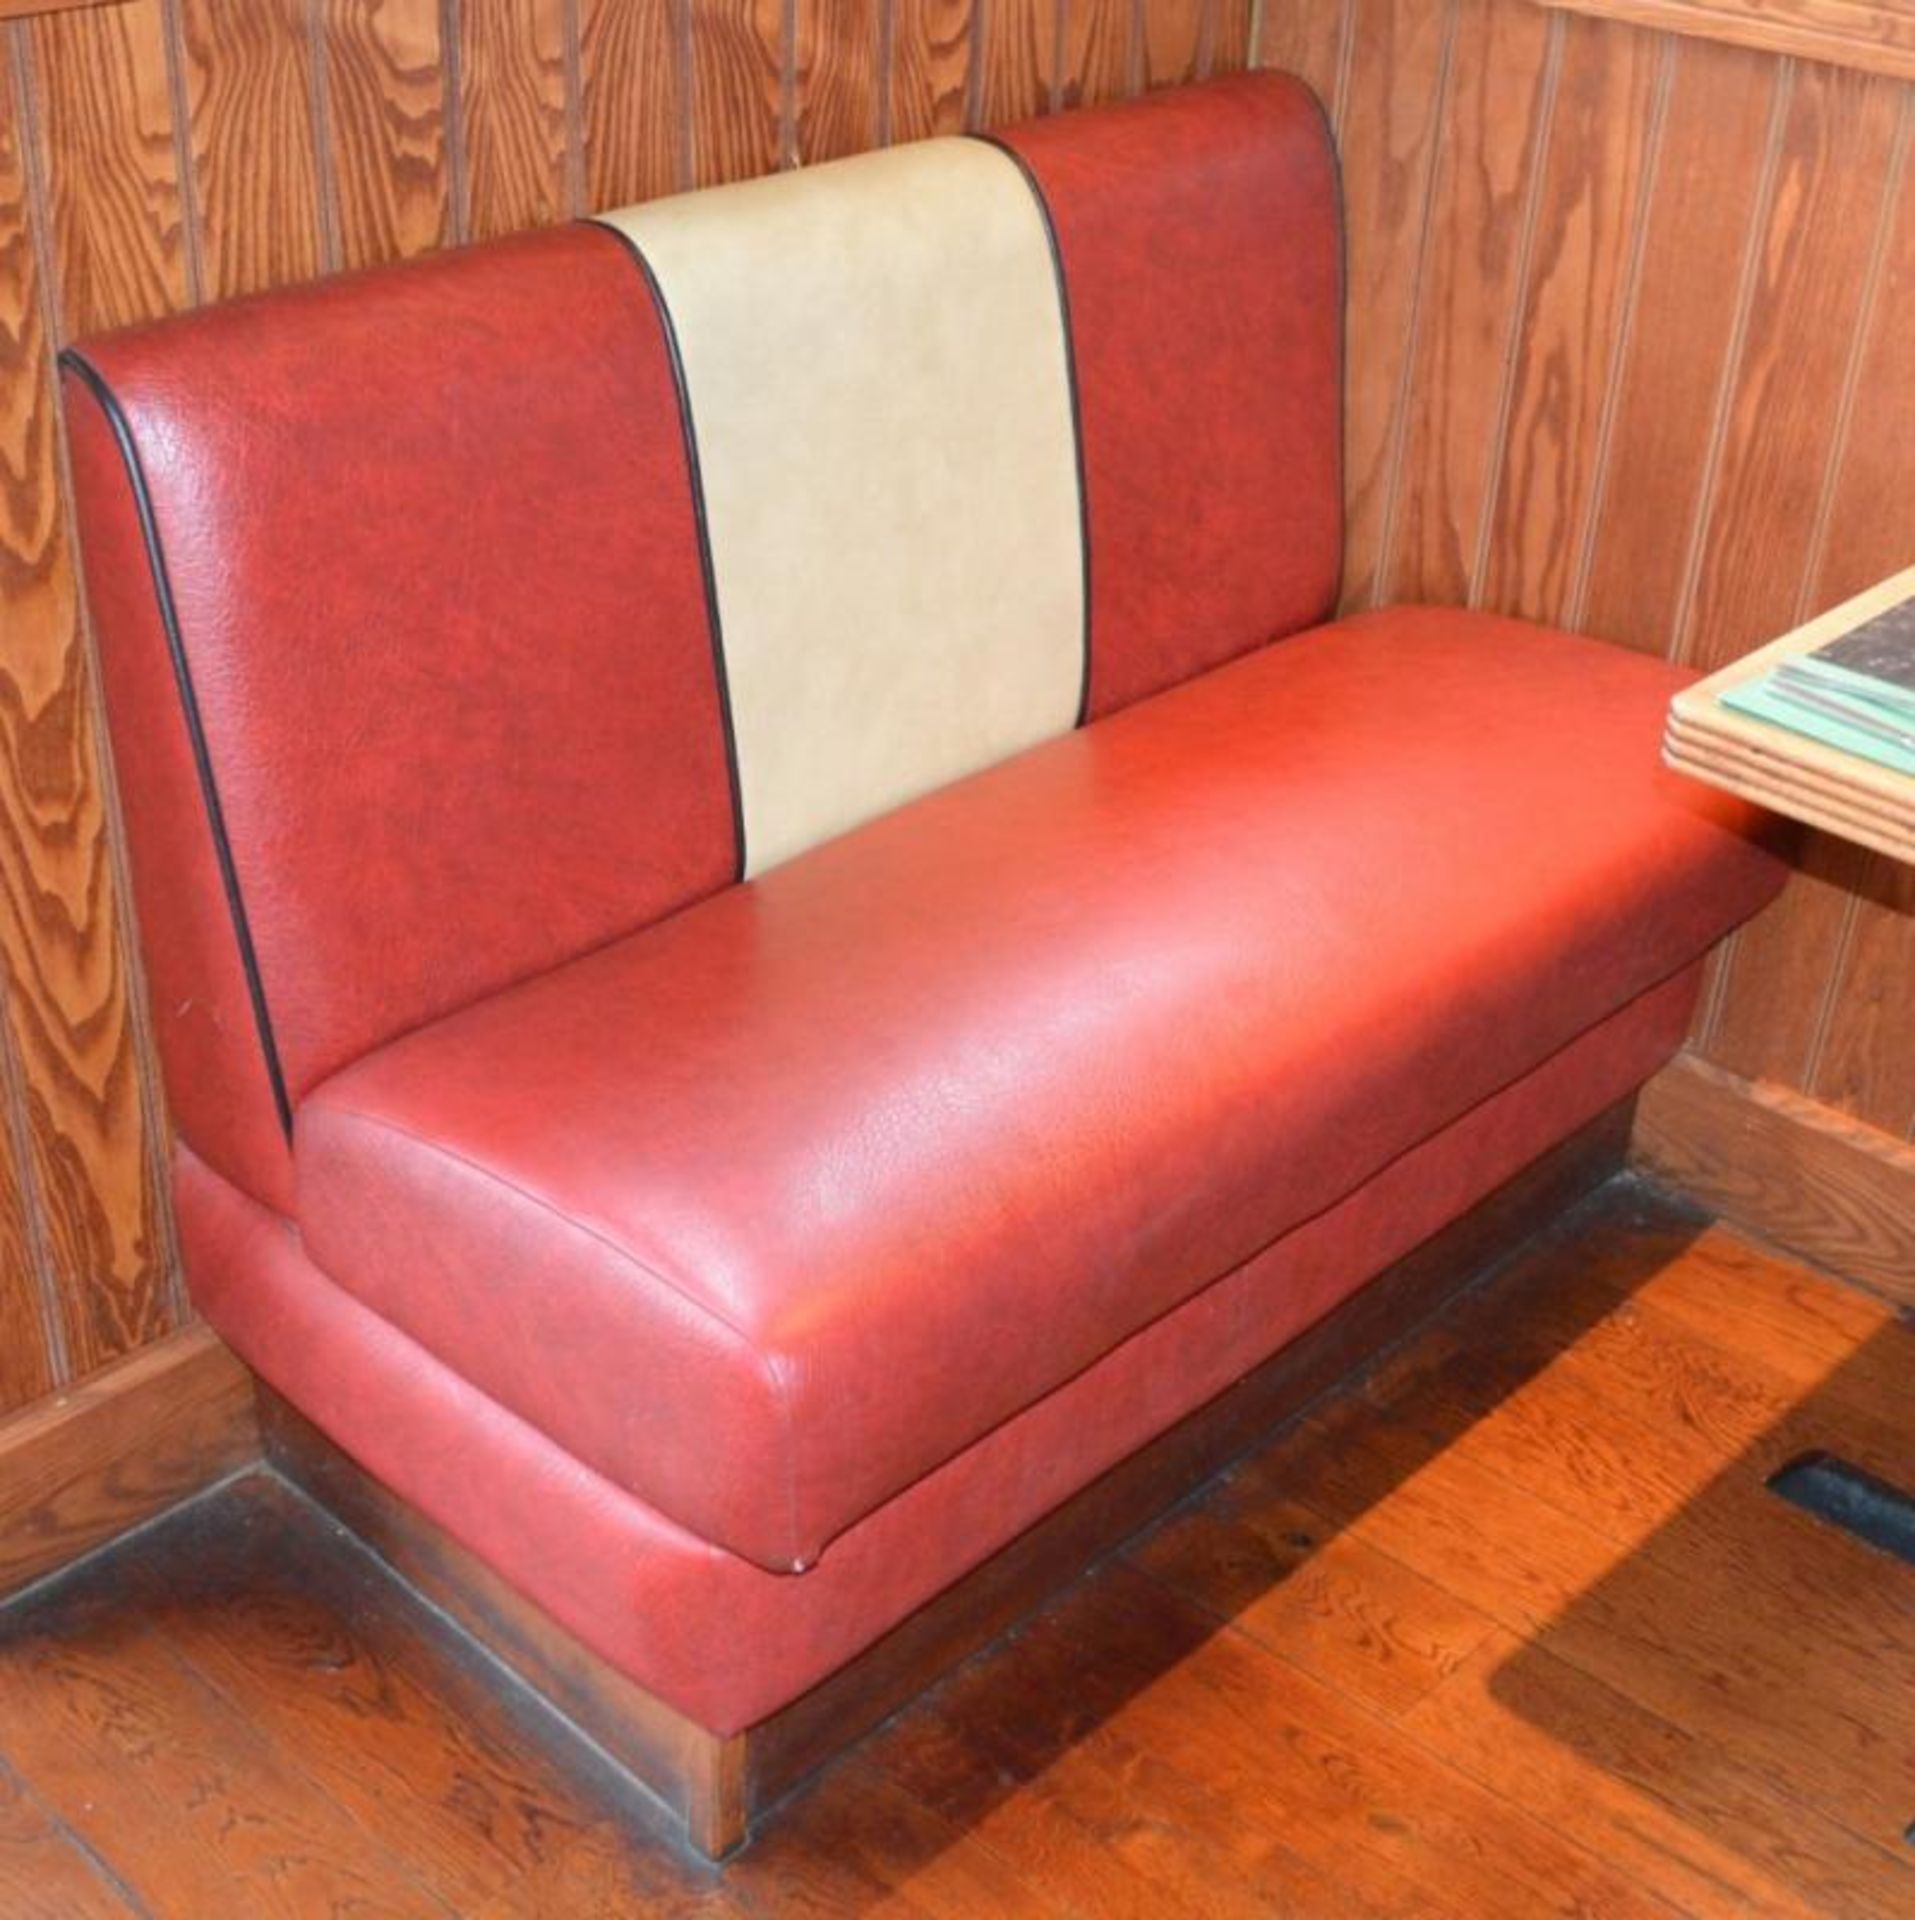 1 x Seating Bench in a 1950's Retro American Diner Design - Upholstered With Red and Cream Faux Leat